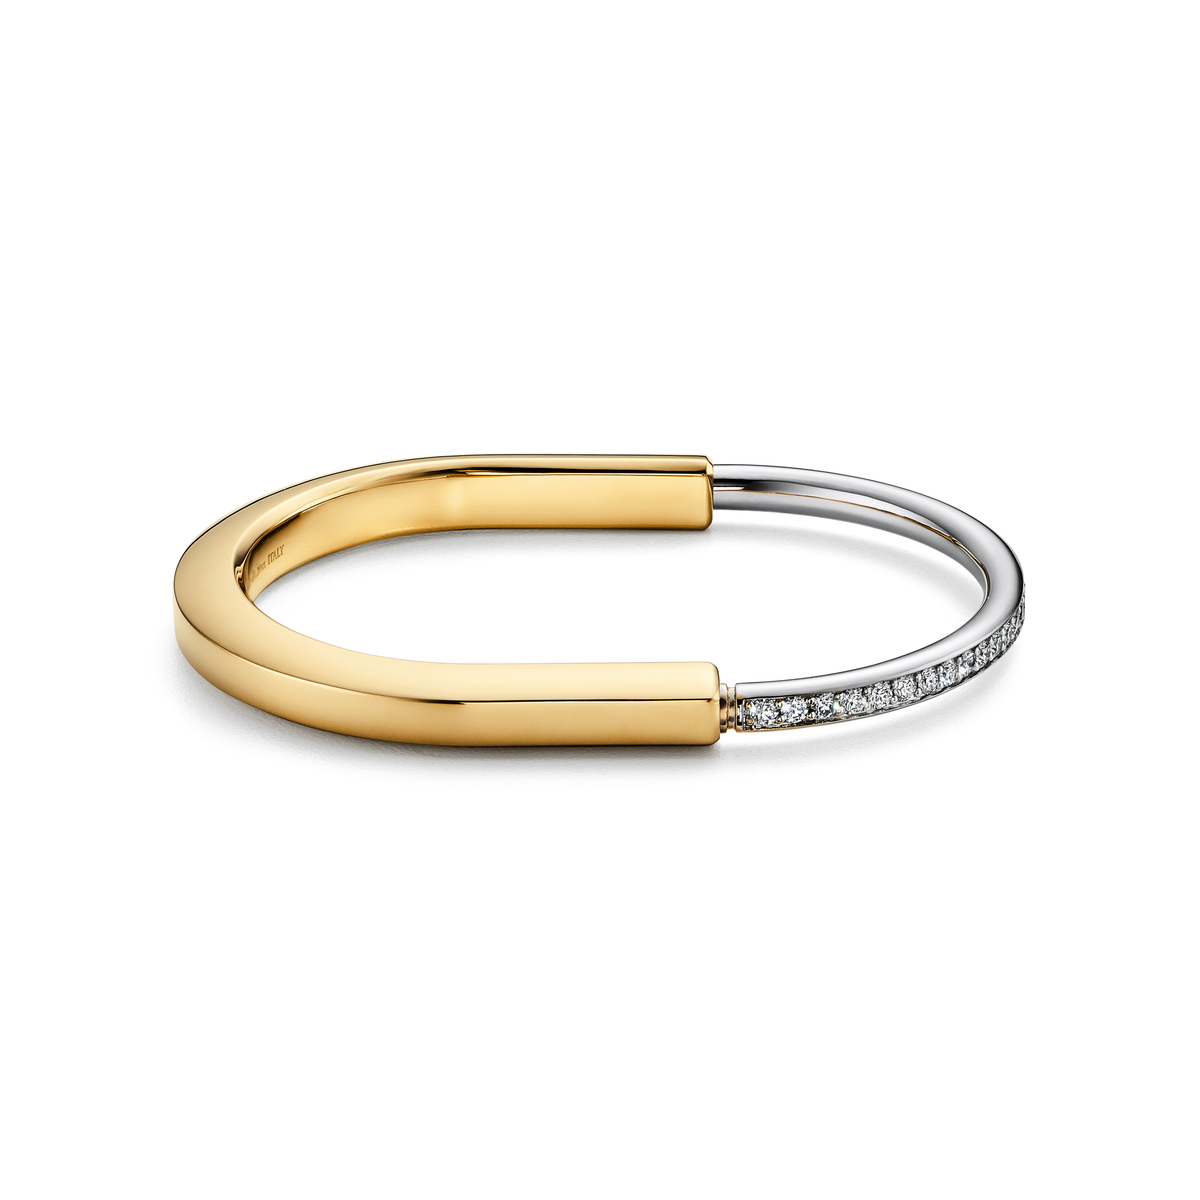 Tiffany Lock Bangle in Yellow and White Gold with Half Pavé Diamonds